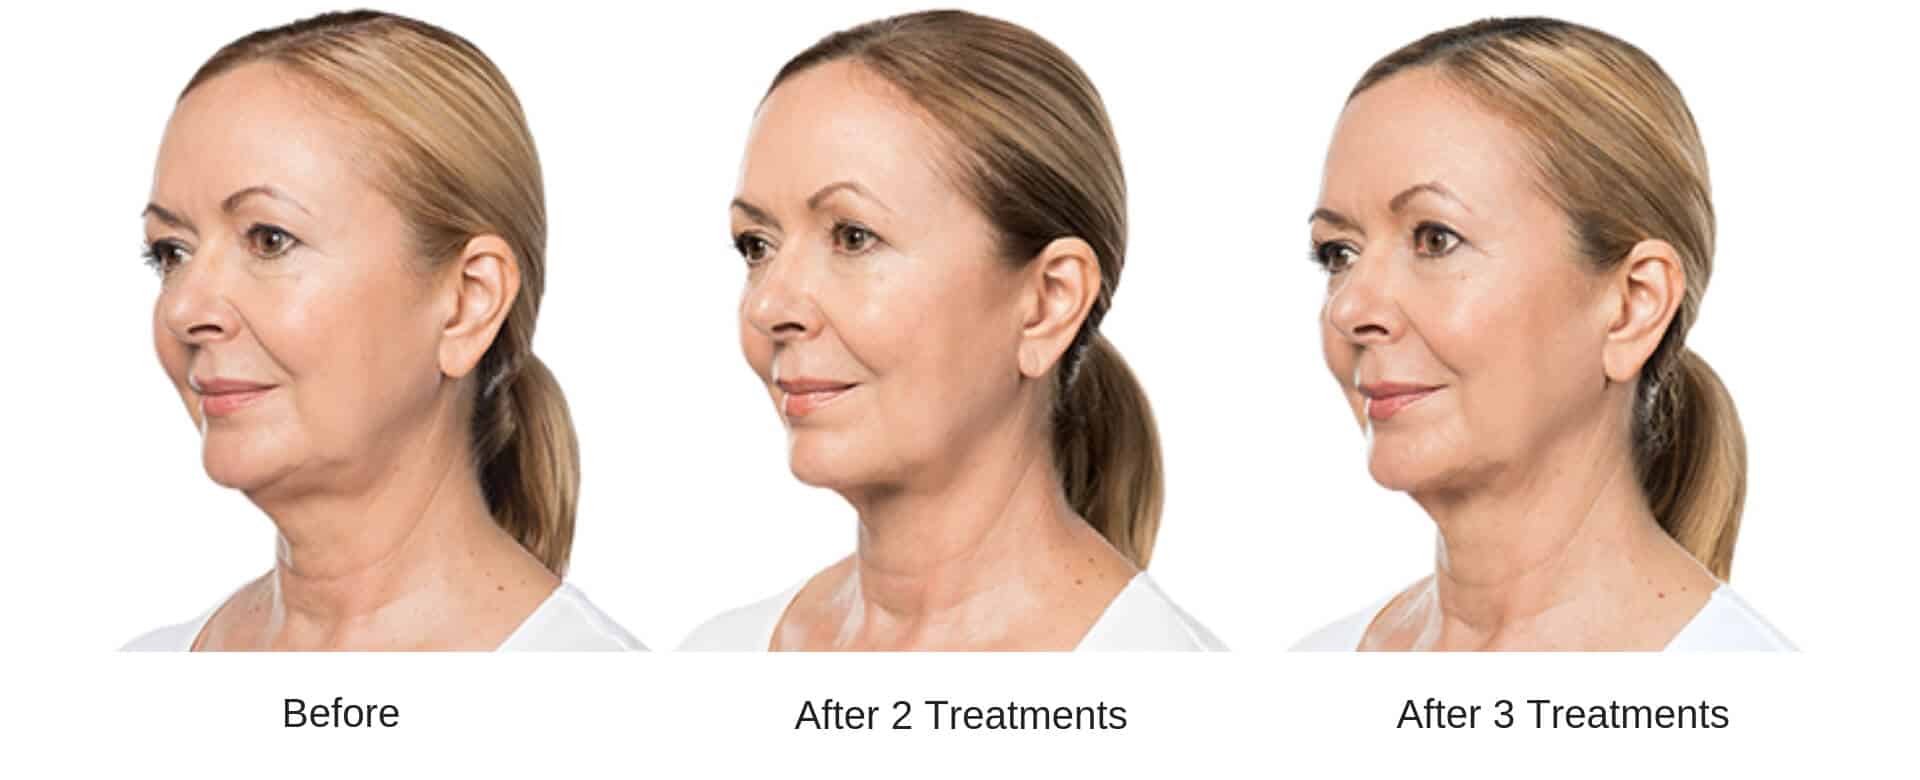 Woman's before and after kybella treatment results.